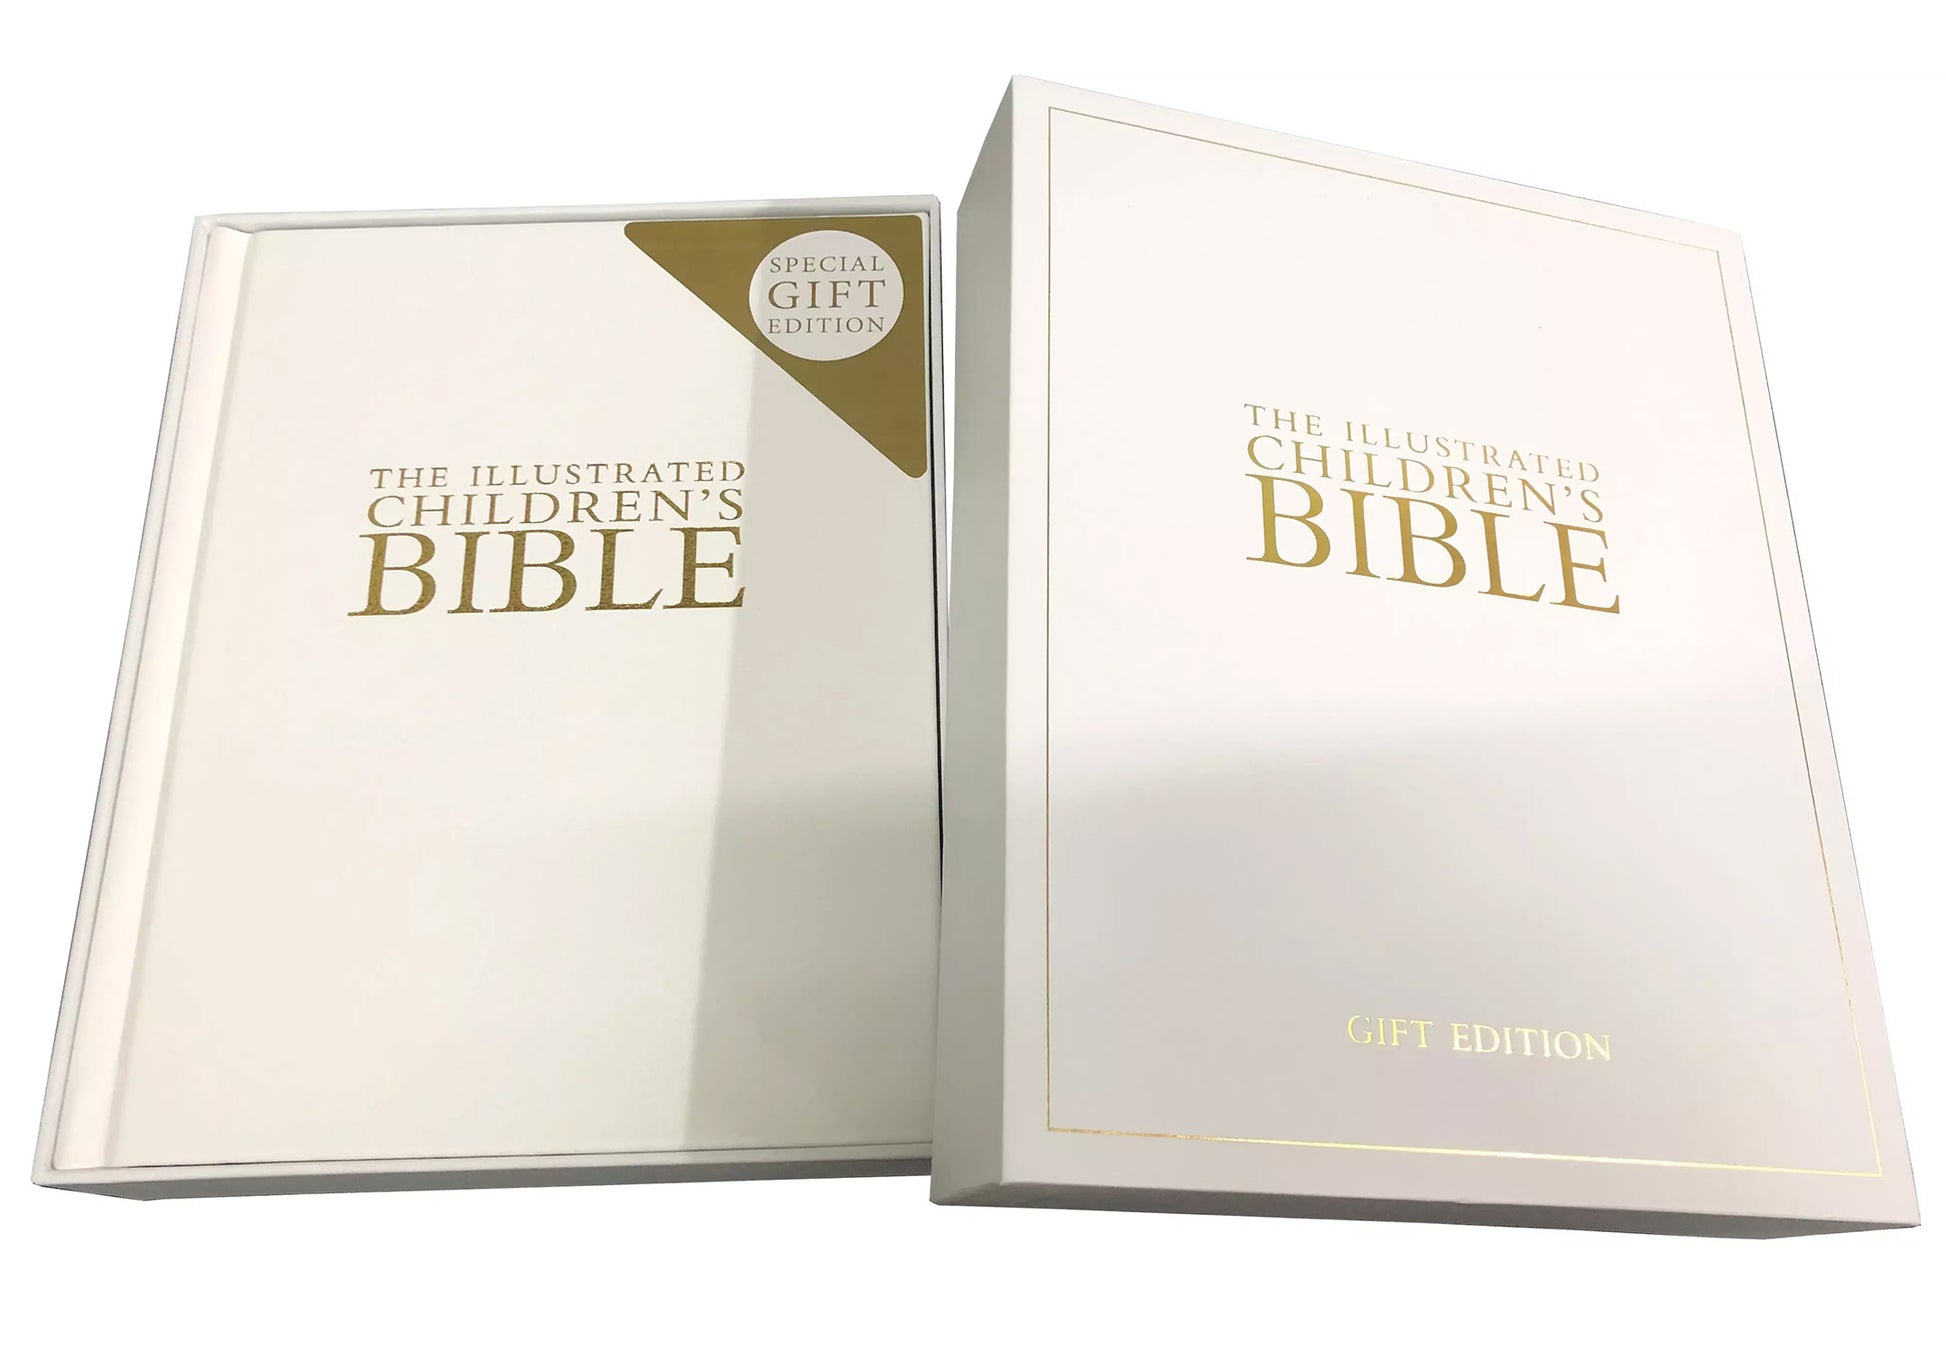 The Illustrated Children's Bible - The Christian Gift Company